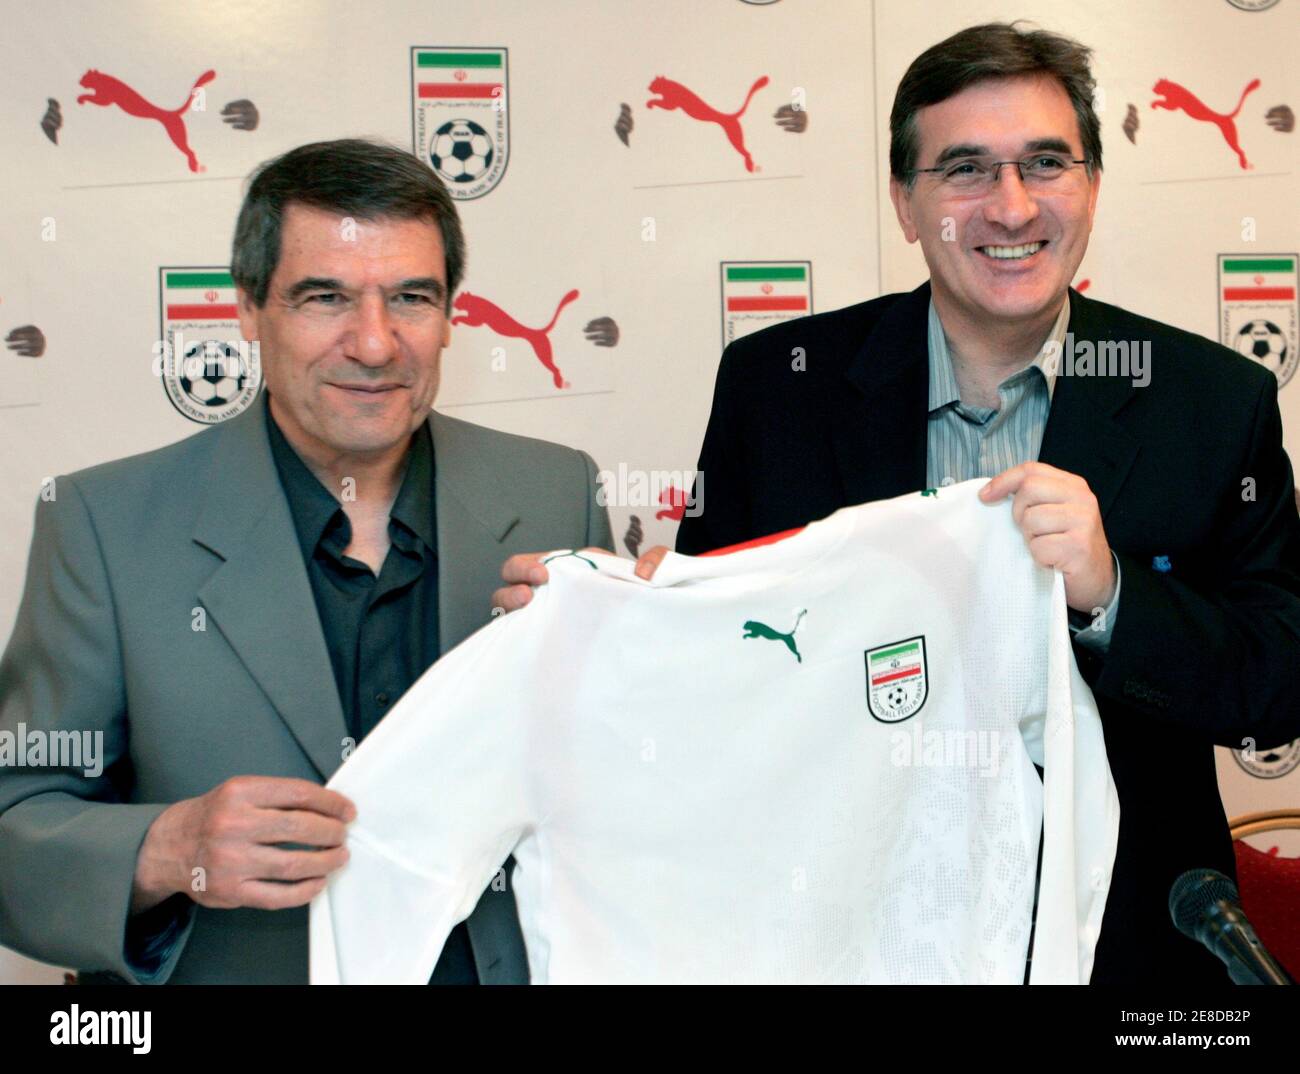 WORLD CUP 2006 PREVIEW Iran national soccer team head coach Branco Ivankovic (R) and assistant Homayoun Shahrokhi hold up a proposed team jersey for the 2006 World Cup during a ceremony in Tehran, Iran April 23, 2006. REUTERS/Raheb Homavandi Stock Photo